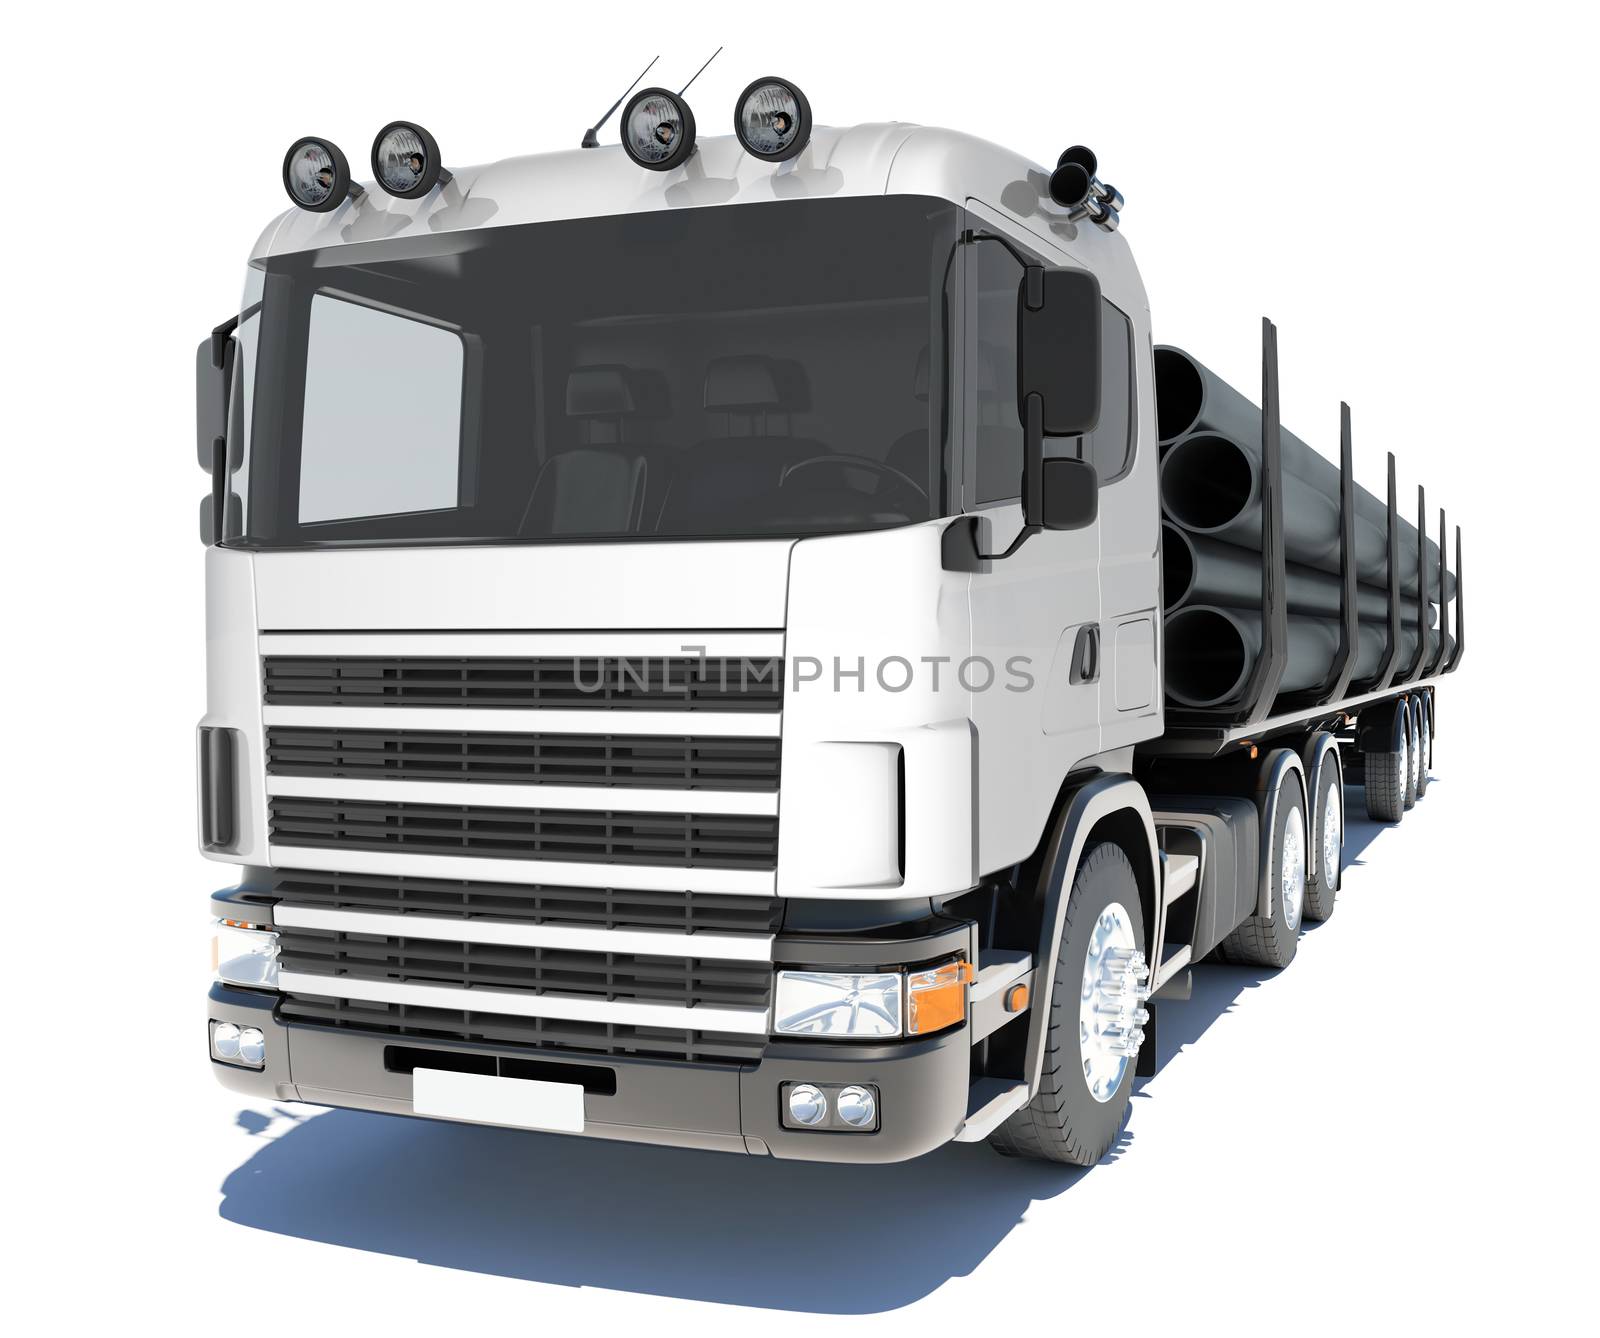 Truck transporting pipe. Isolated render on a white background